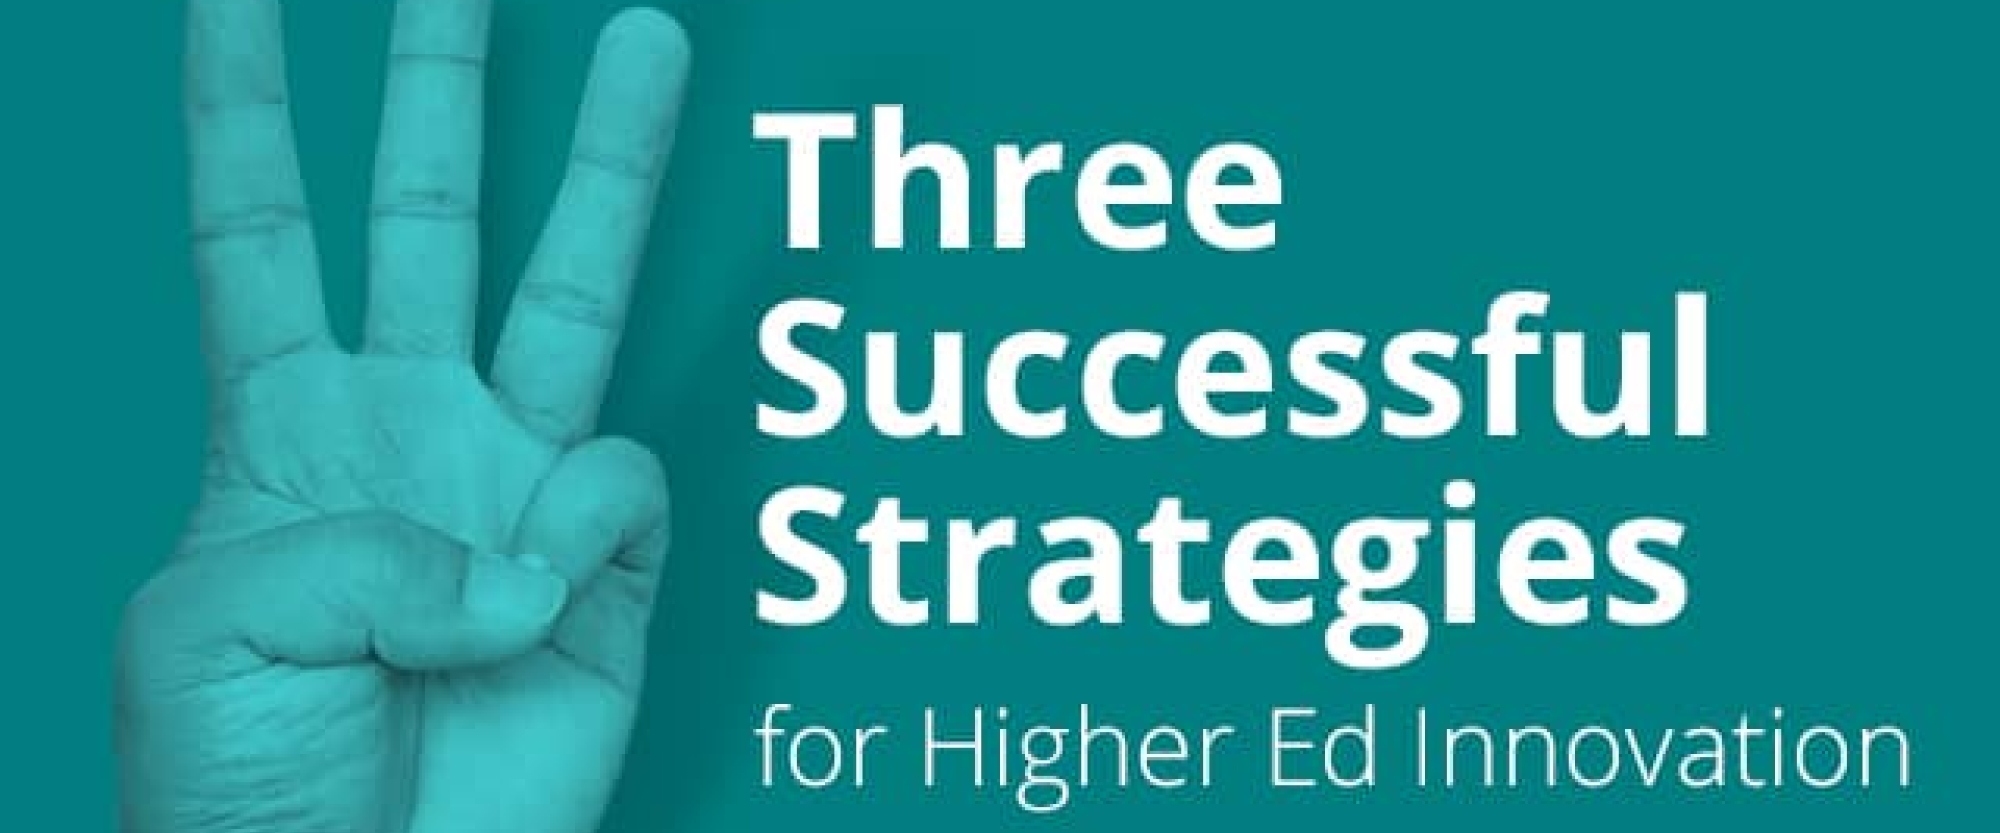 Three Successful Strategies for Higher Ed Innovation